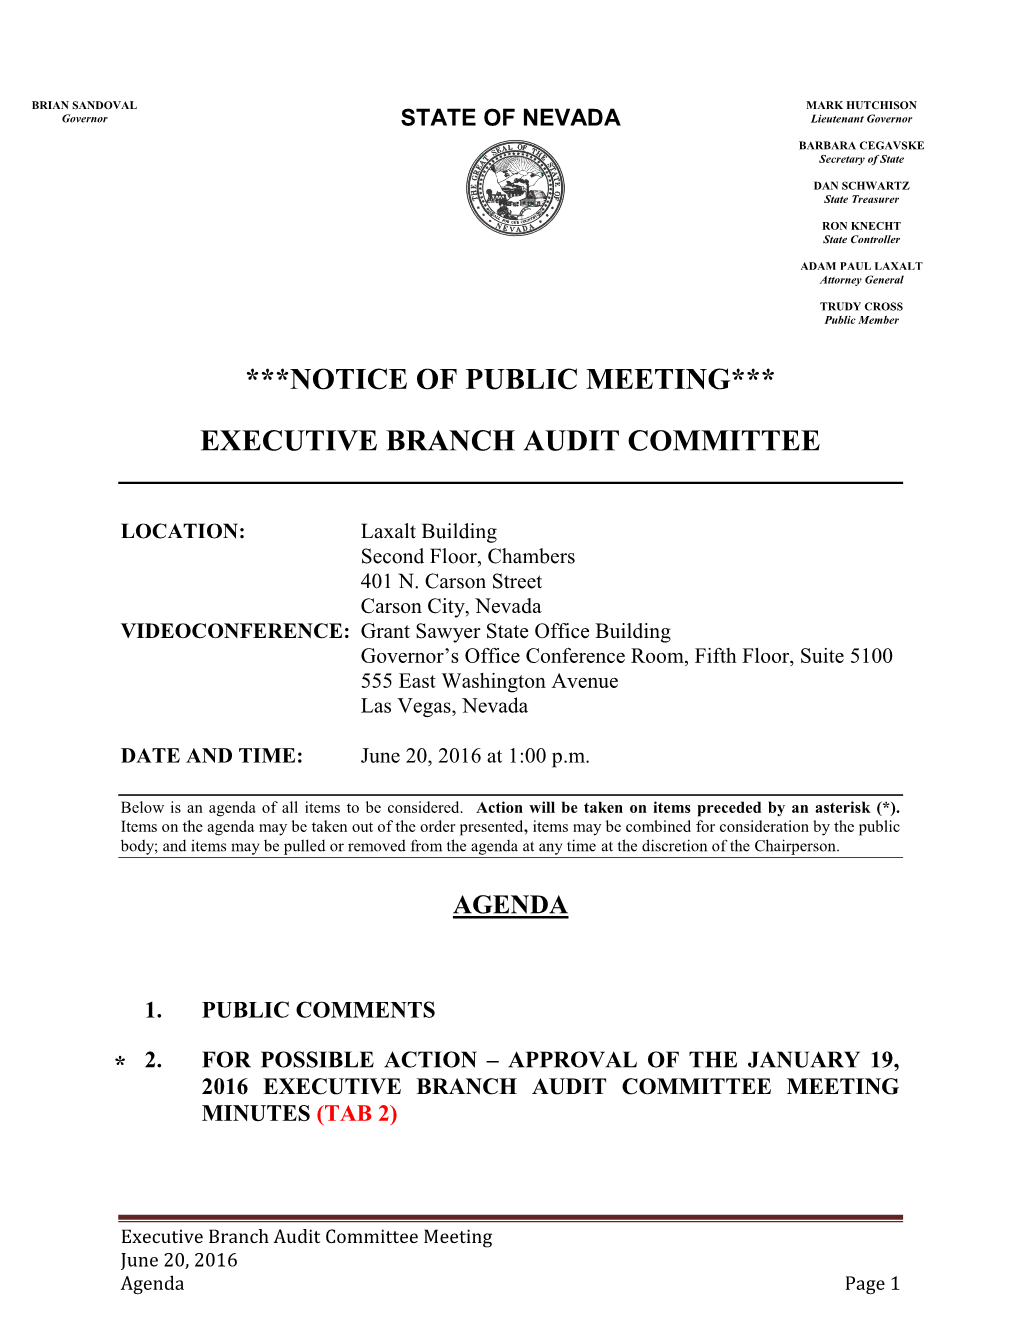 ***Notice of Public Meeting*** Executive Branch Audit